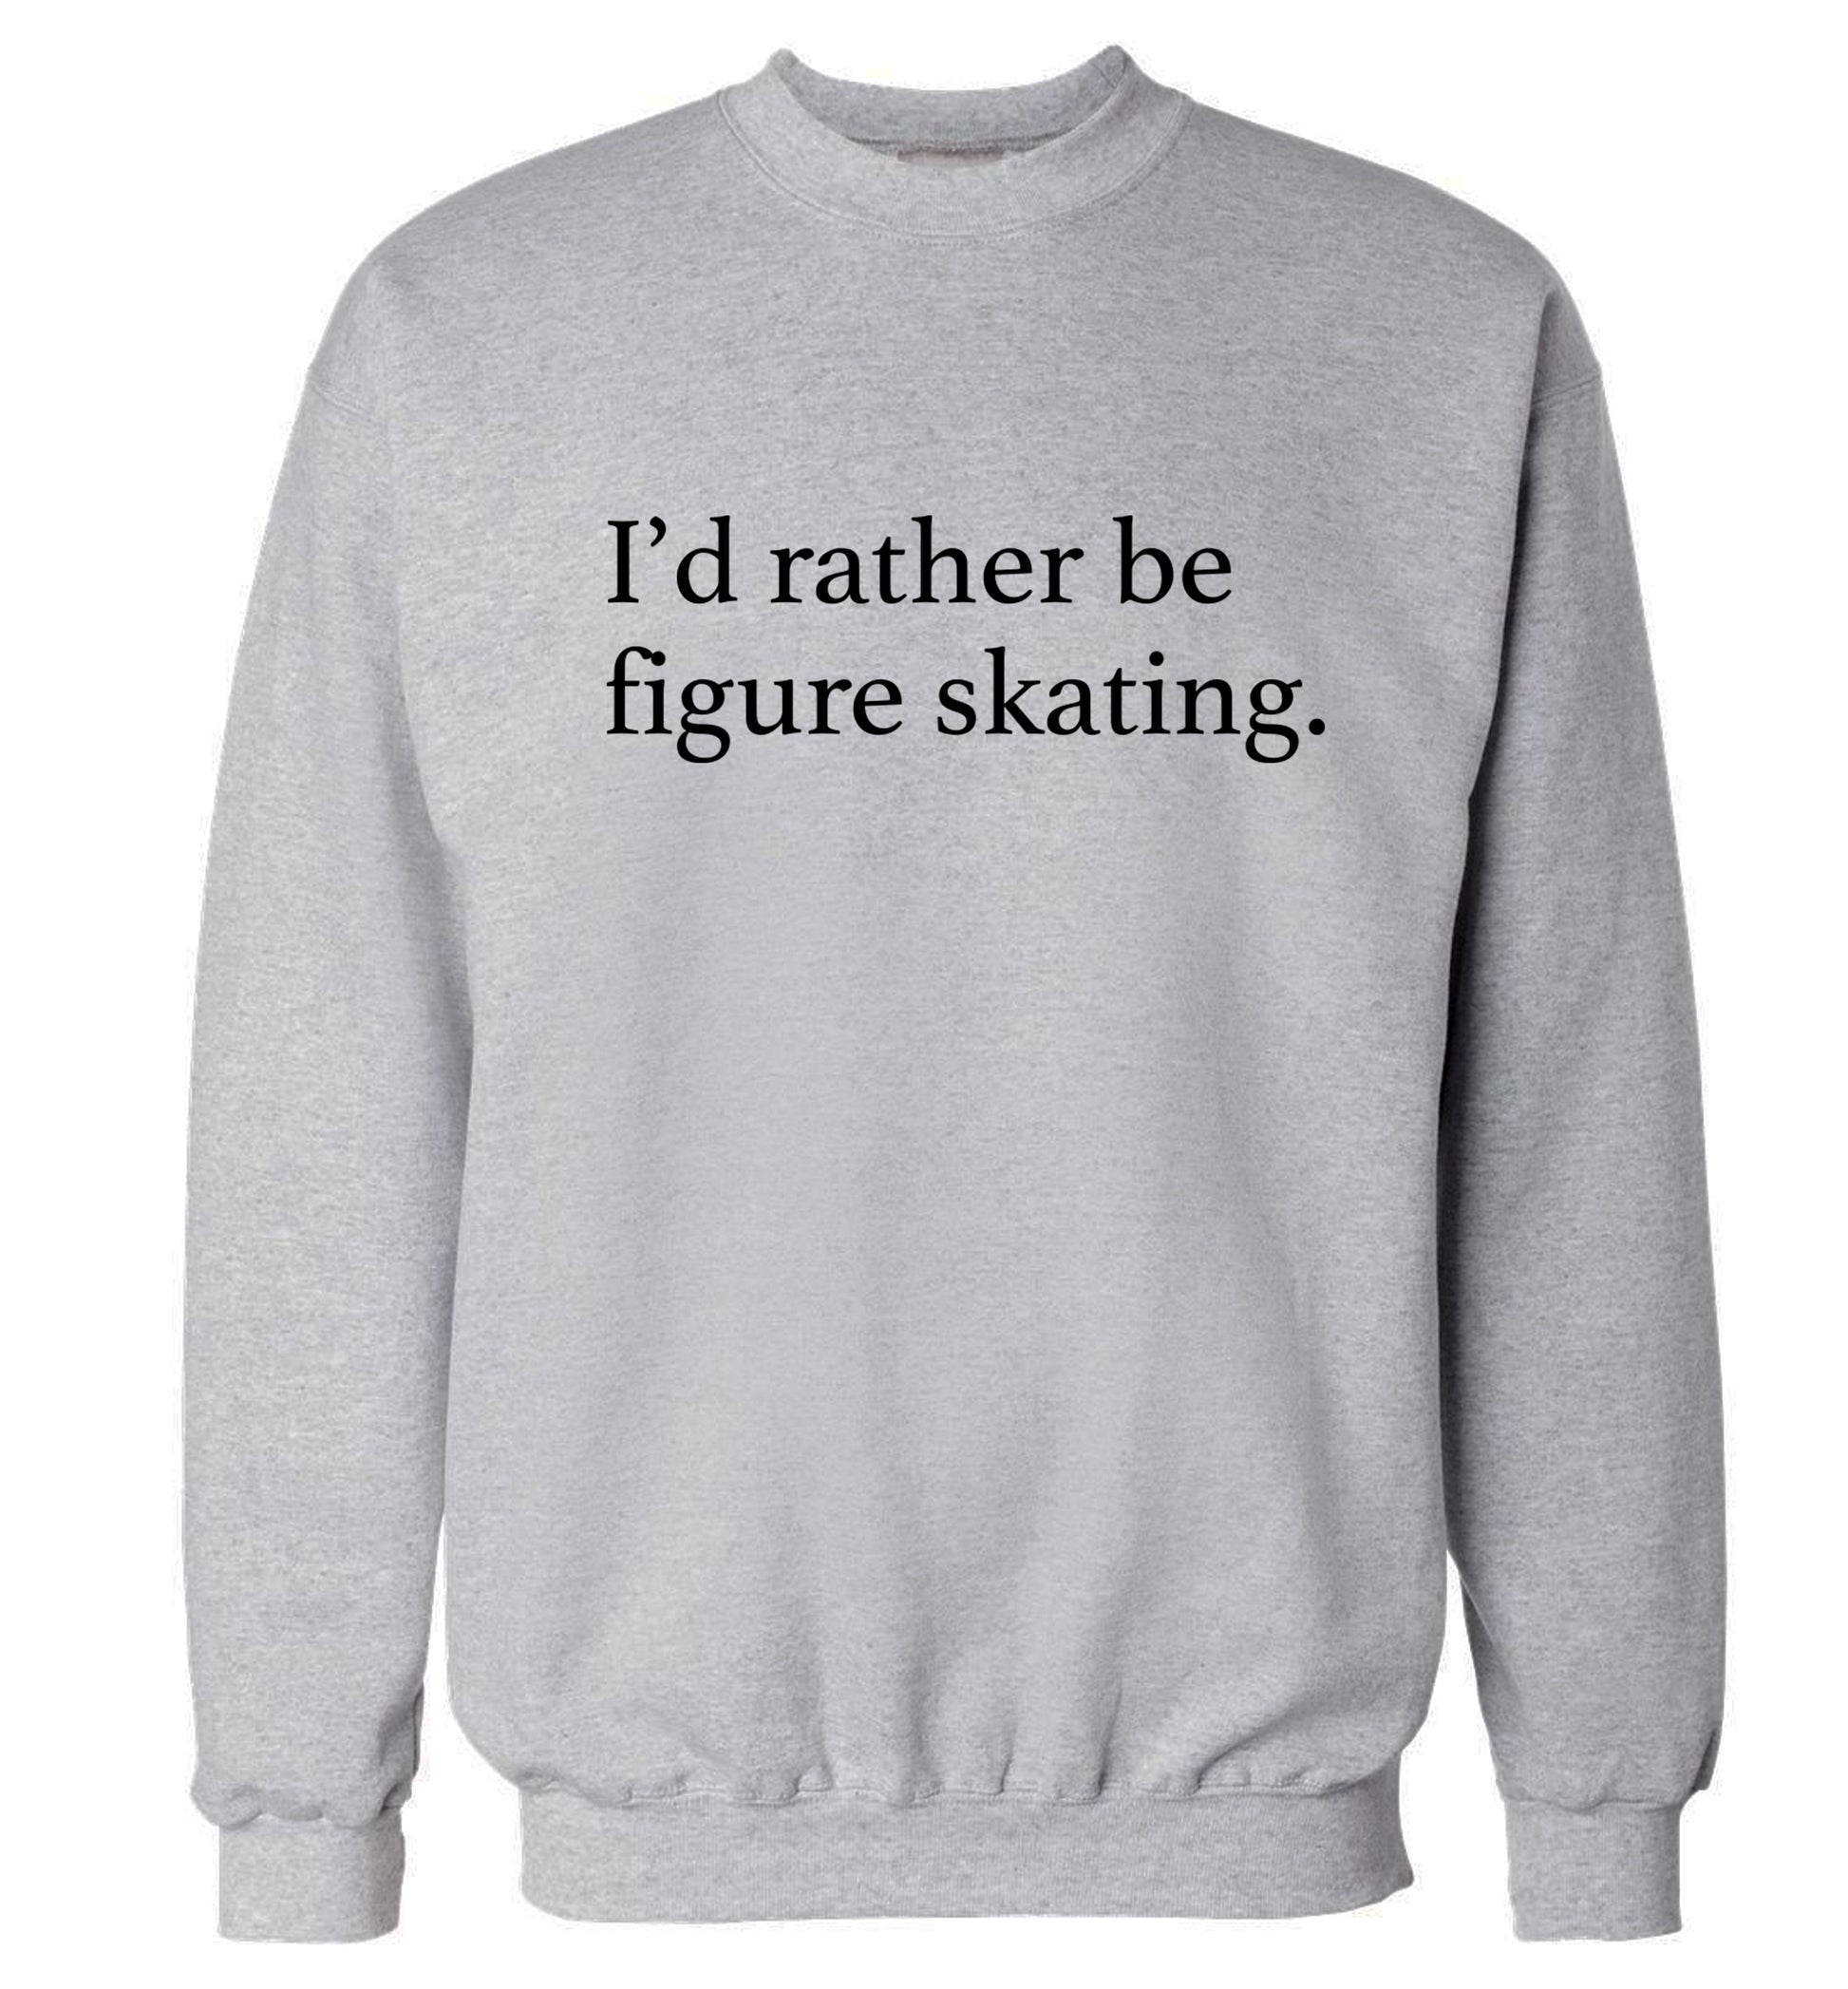 I'd rather be figure skating Adult's unisexgrey Sweater 2XL